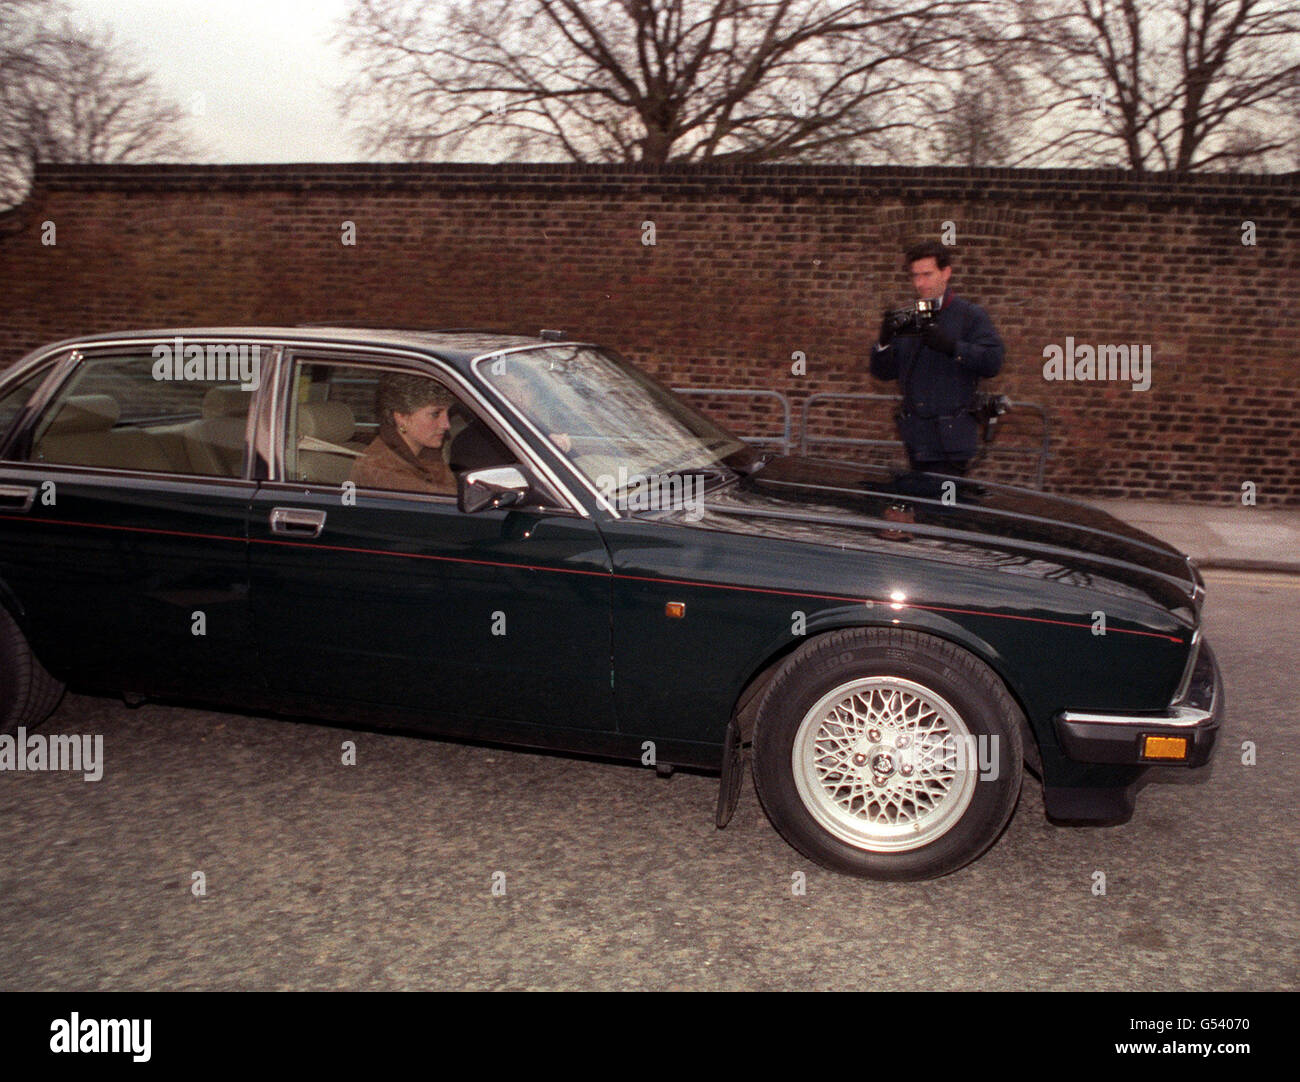 DIANA'S JAGUAR: The Princess of Wales leaving Kensington Palace, London, in her green Jaguar XJ6 Saloon. The Princess has caused a political row by leasing a Mercedes 500SL, making her the first Royal to choose a foreign car. Stock Photo